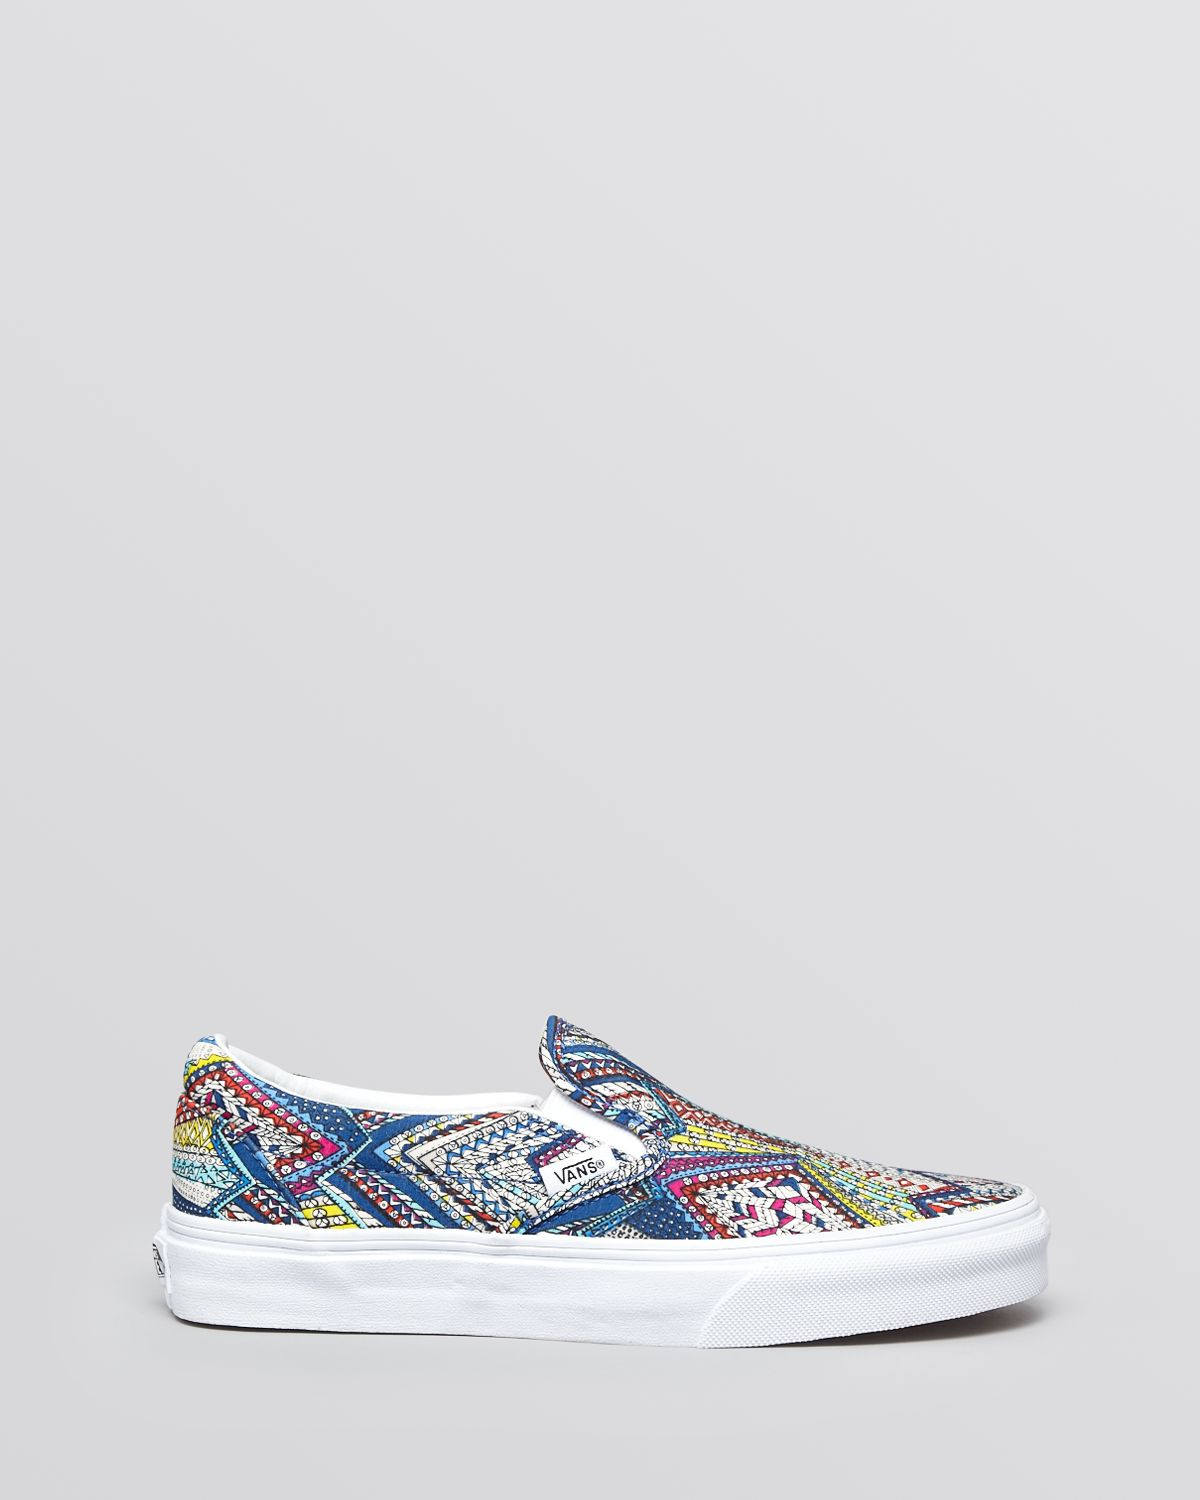 Vans Flat Sneakers Classic Patterned Canvas Slipon in Multicolor ...